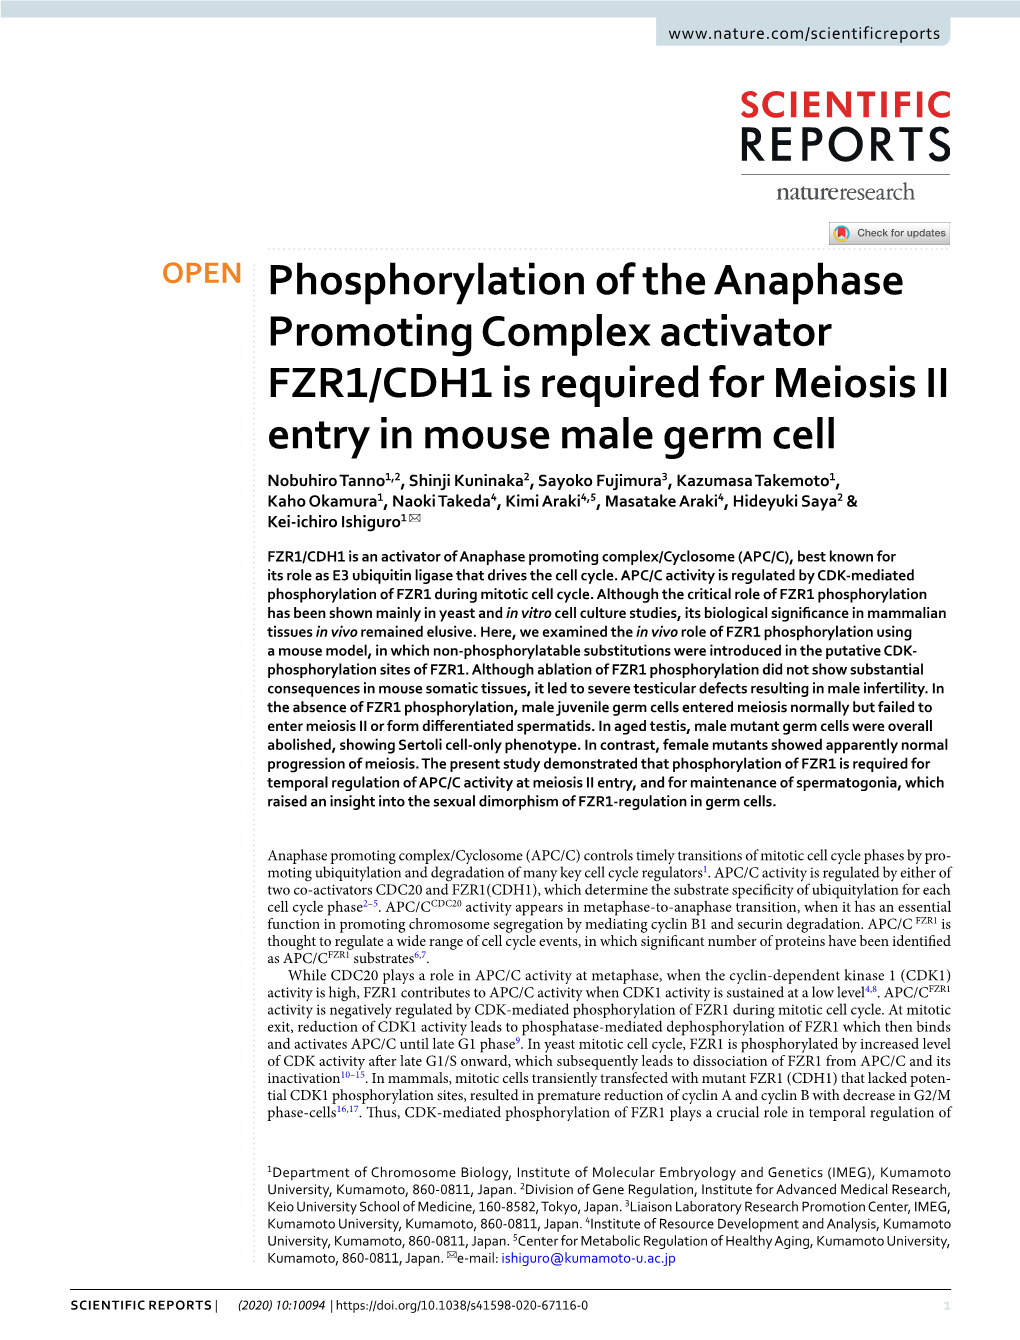 Phosphorylation of the Anaphase Promoting Complex